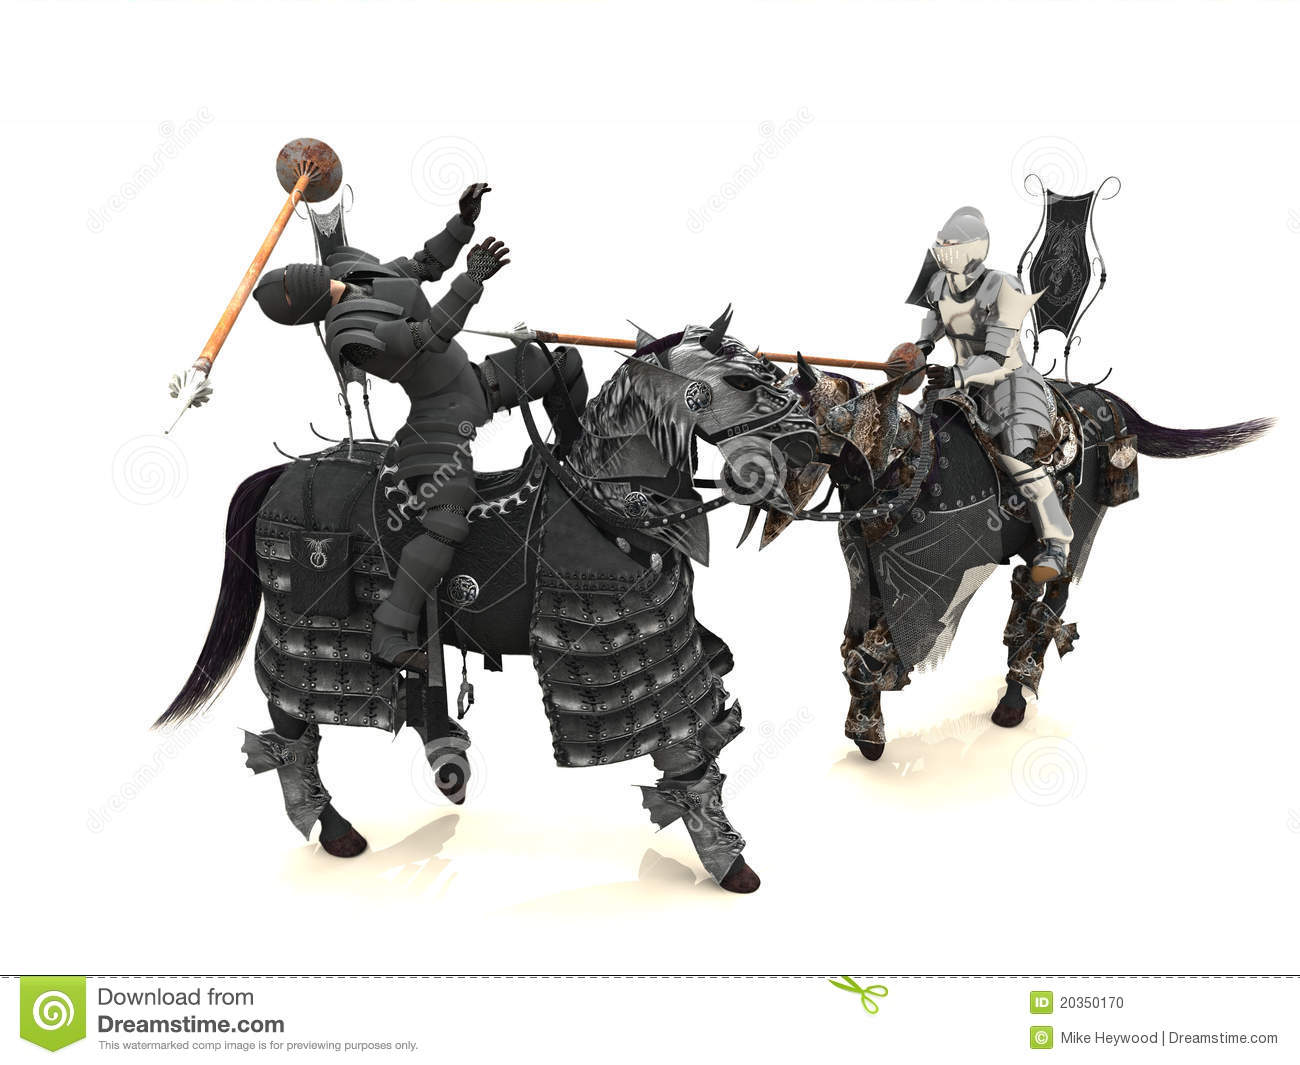 Silver Knight Unhorses Black Knight In Mounted Combat